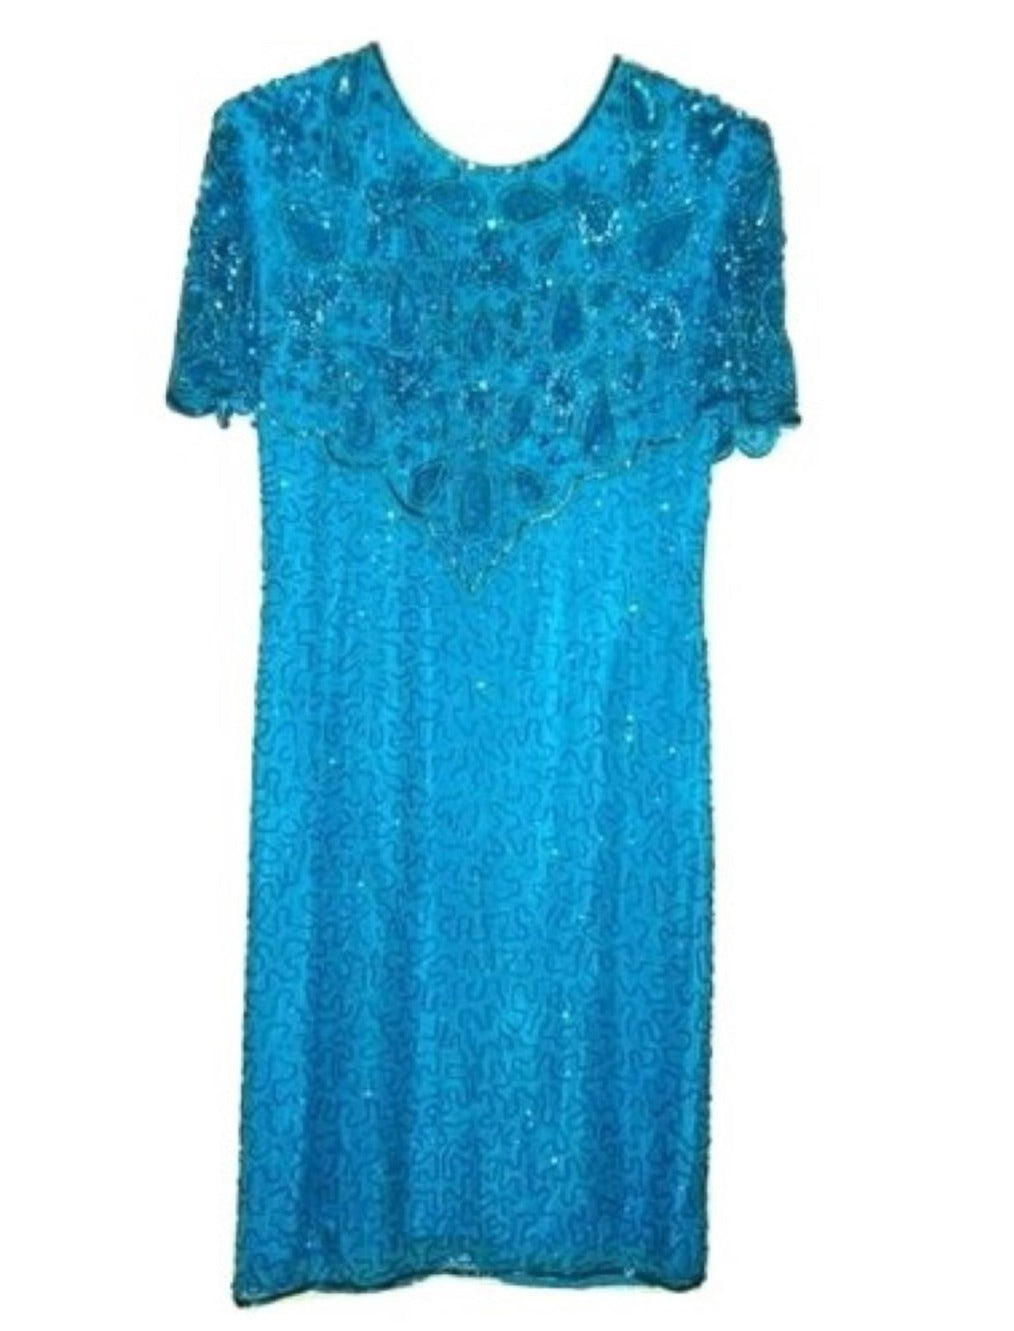 Vintage American Nights – Turquoise Beaded, Sequined Formal Dress Sz S 6-8 ?